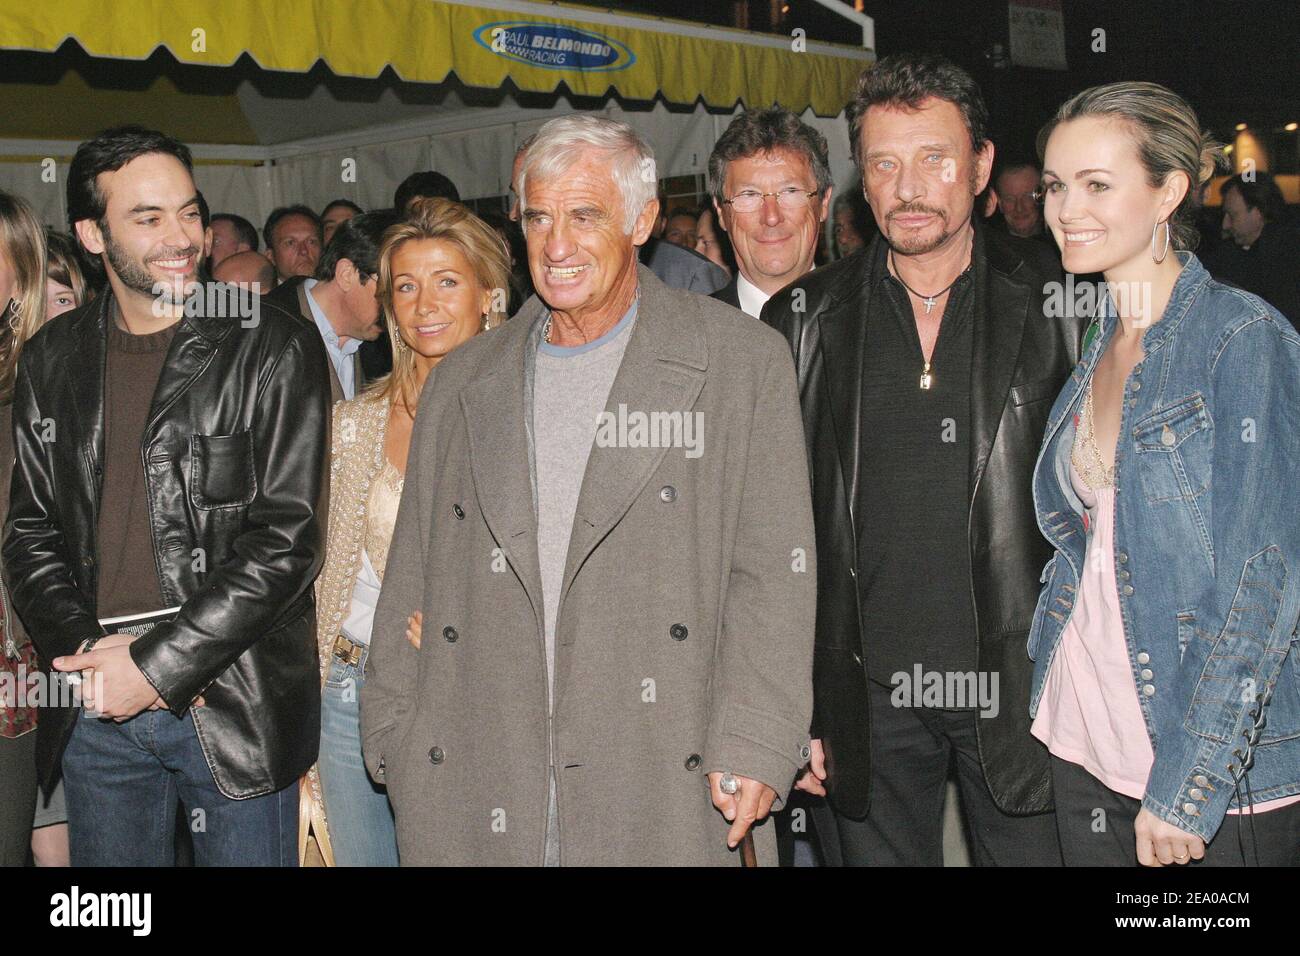 File photo : (L-R) Anthony Delon, Natty and Jean-Paul Belmondo, Johnny Hallyday and his wife Laeticia during a party held at L'Etoile in Paris, France, on March 15, 2005, to present the cars of the 'Paul Belmondo Racing' team which will participate in this year's 24 Hours of Le Mans sportscar race. France's biggest rock star Johnny Hallyday has died from lung cancer, his wife says. He was 74. The singer - real name Jean-Philippe Smet - sold about 100 million records and starred in a number of films. Photo by Benoit Pinguet/ABACA. Stock Photo